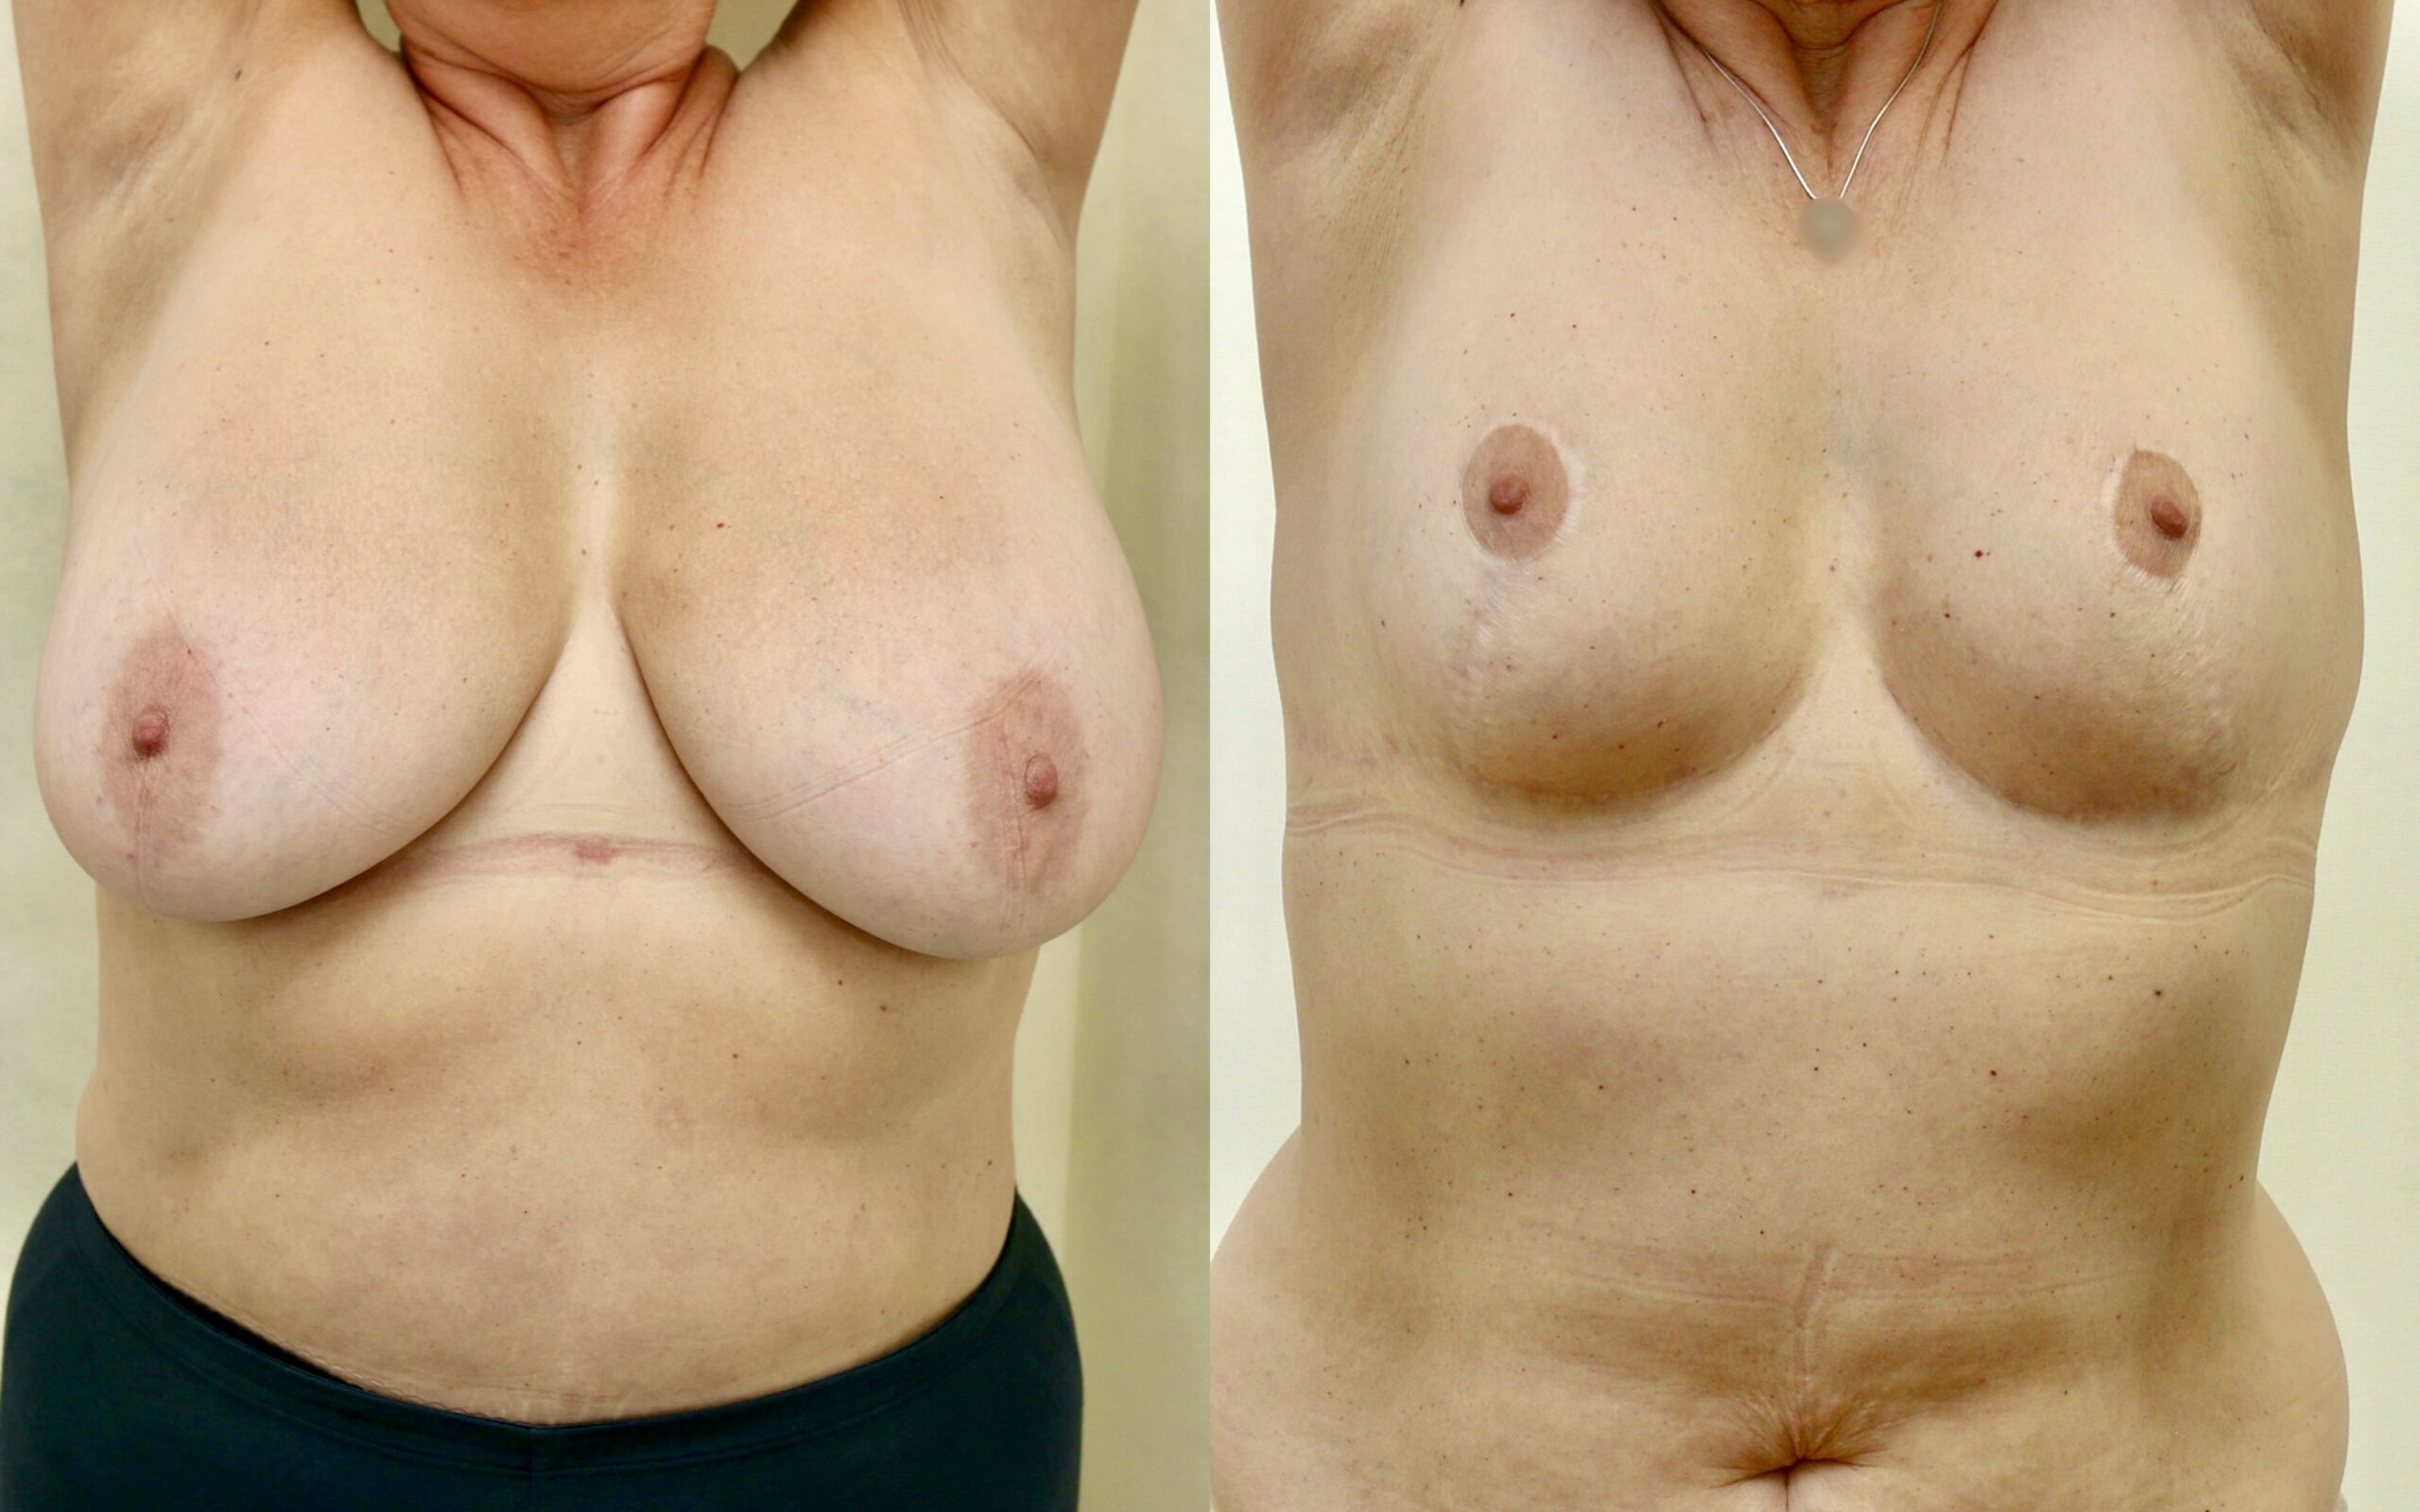 Breast reduction 6 months and 3 years